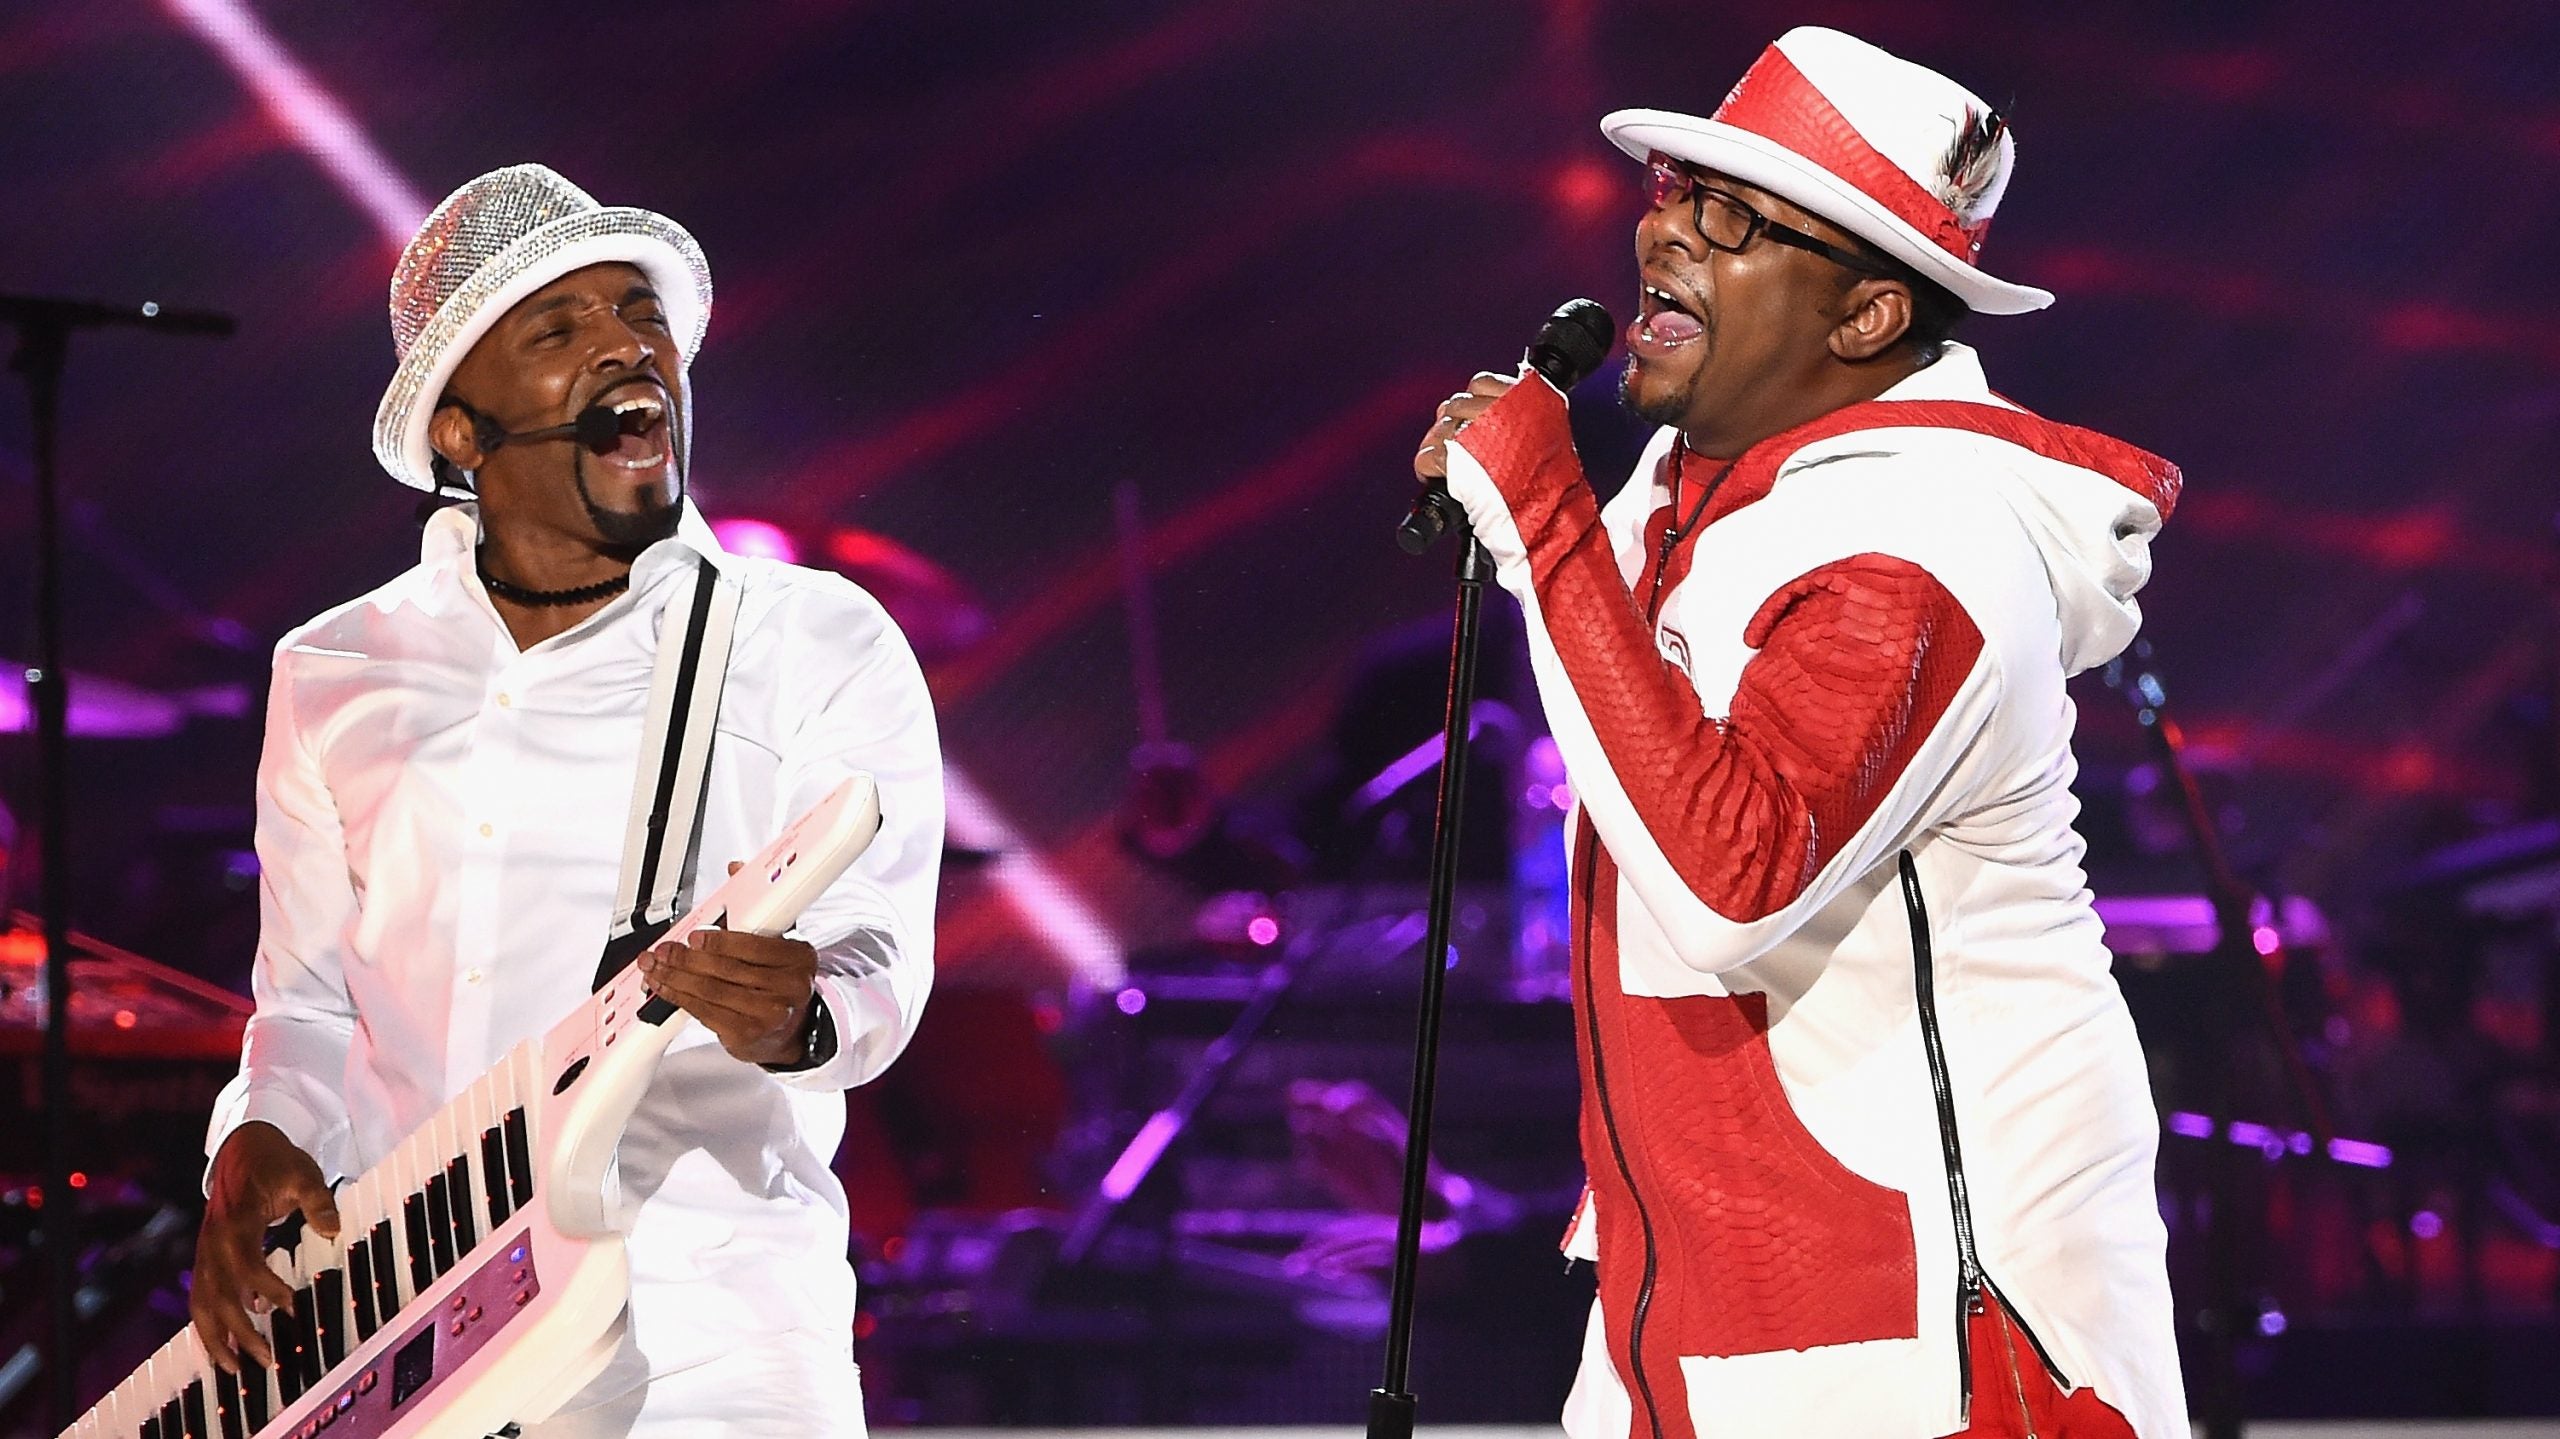 Teddy Riley Says He And Bobby Brown Had Beef While Recording 'My Prerogative'